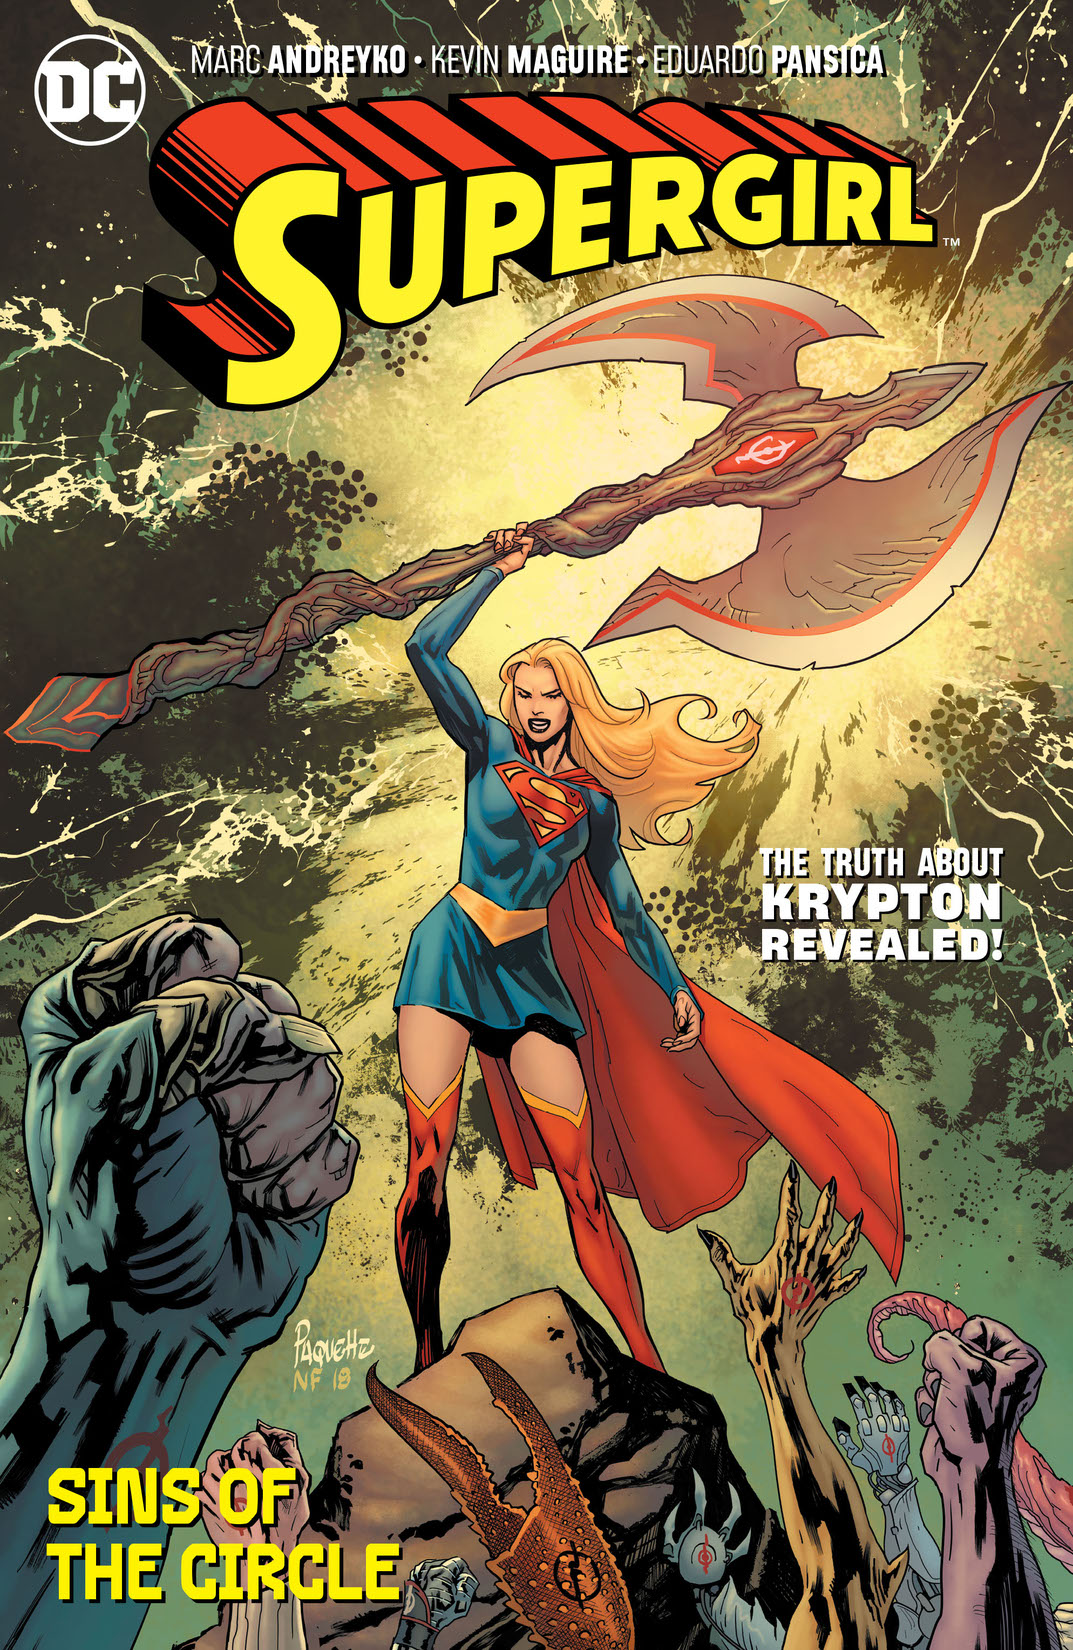 Supergirl Vol. 2: Sins of the Circle preview images